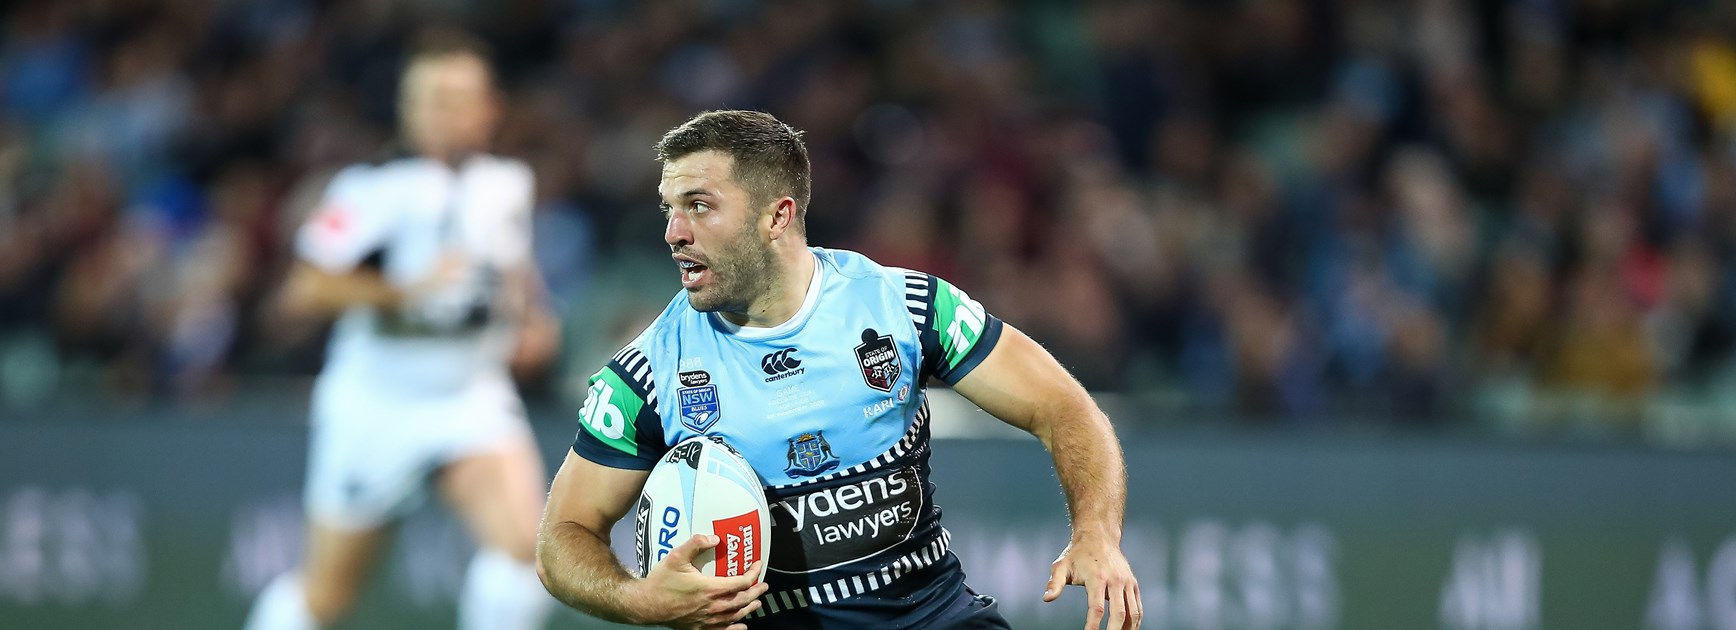 Tedesco to Lead NSW in 2021 State of Origin Series